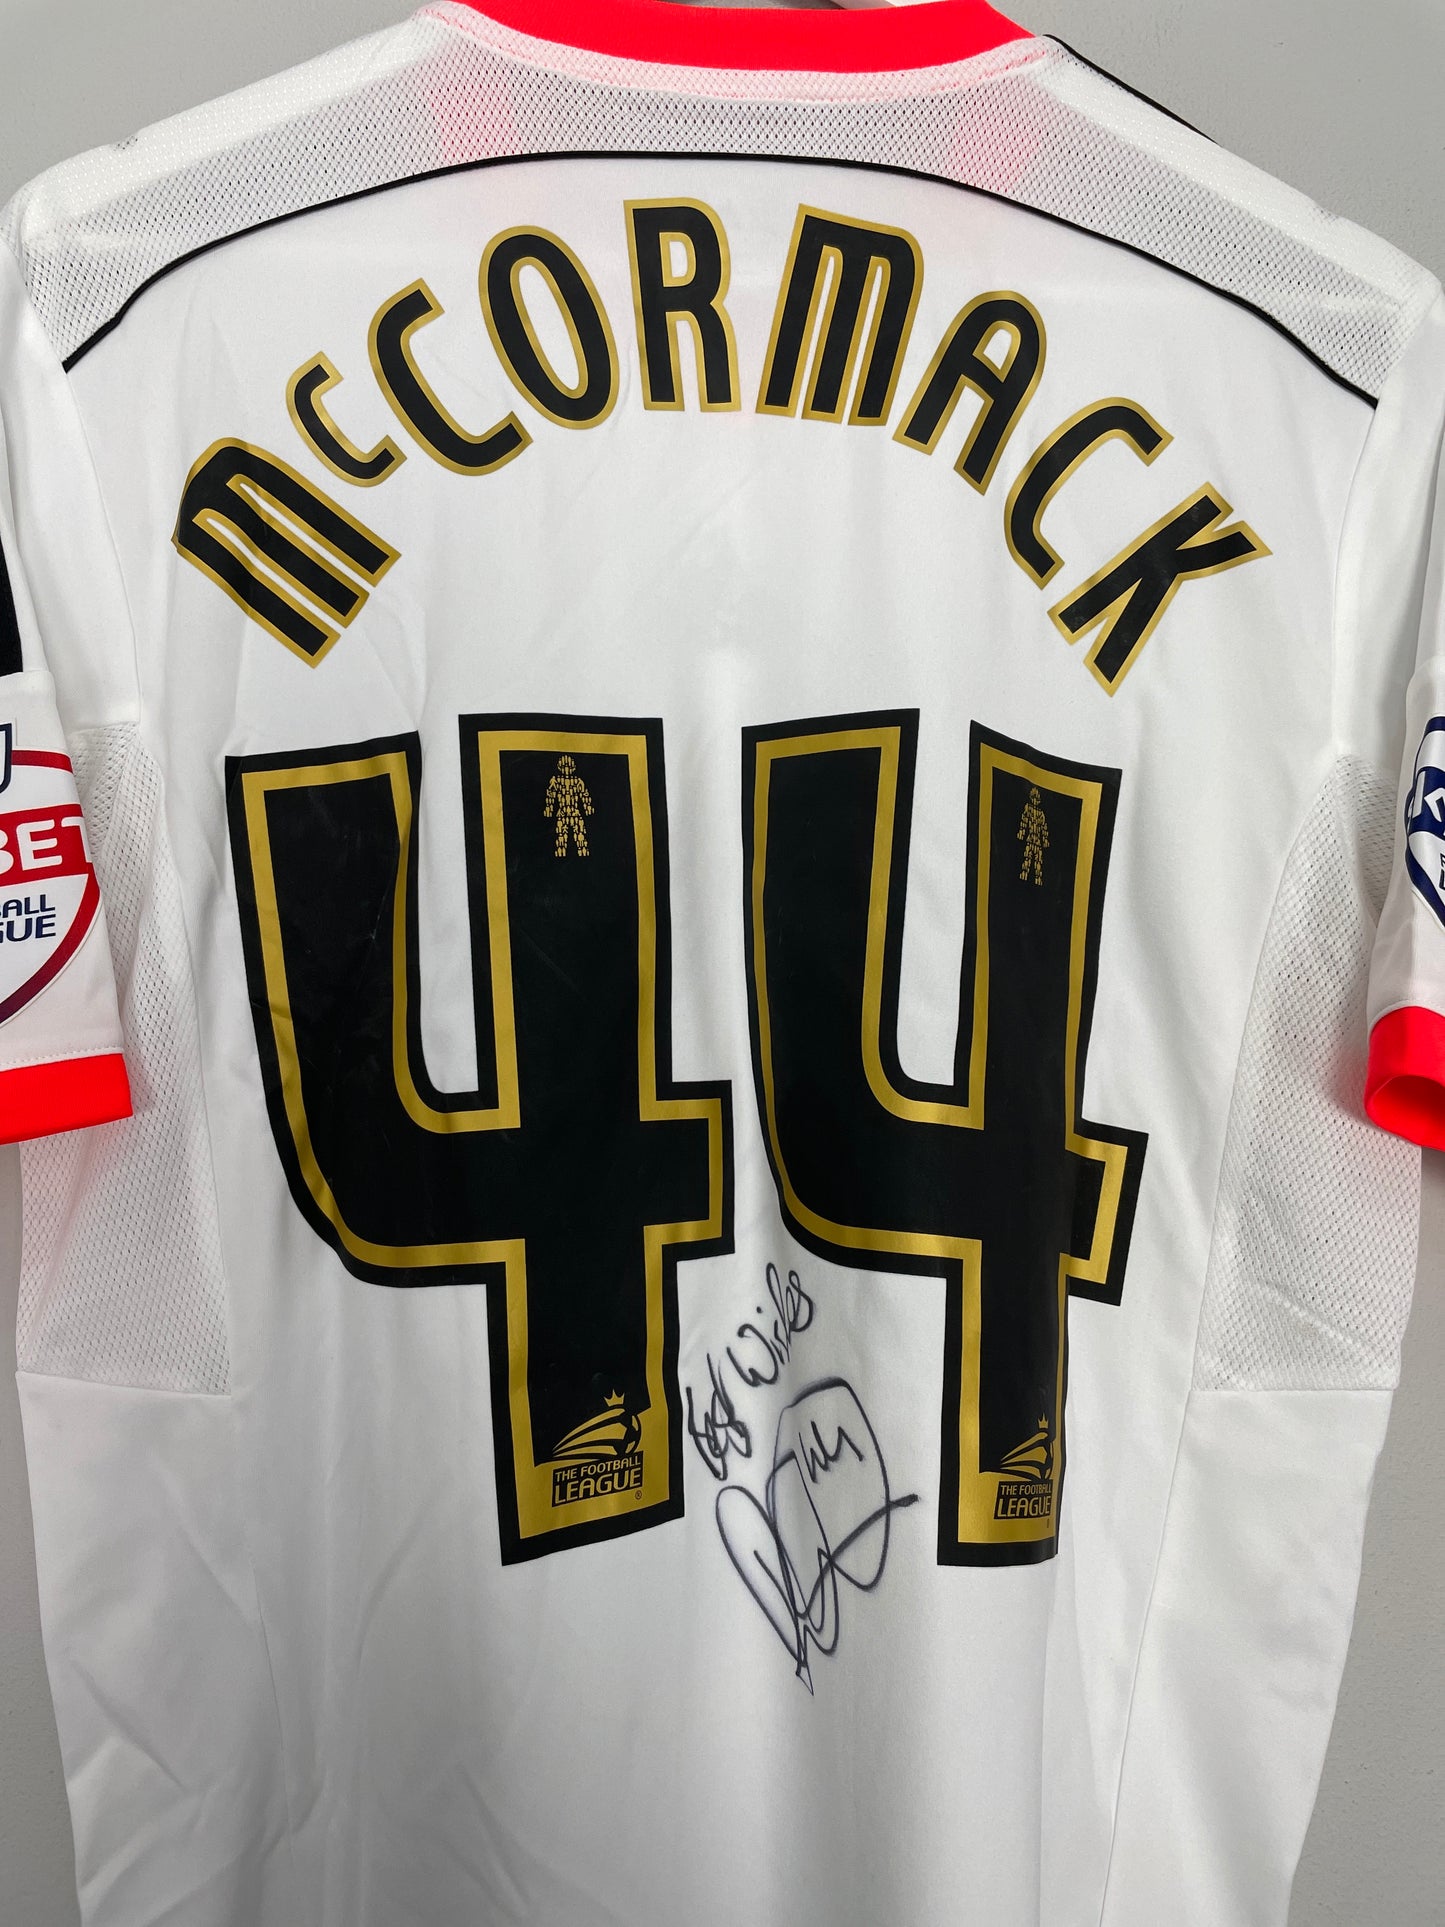 2014/15 FULHAM MCCORMACK #44 *MATCH ISSUE + SIGNED* HOME SHIRT (M) ADIDAS